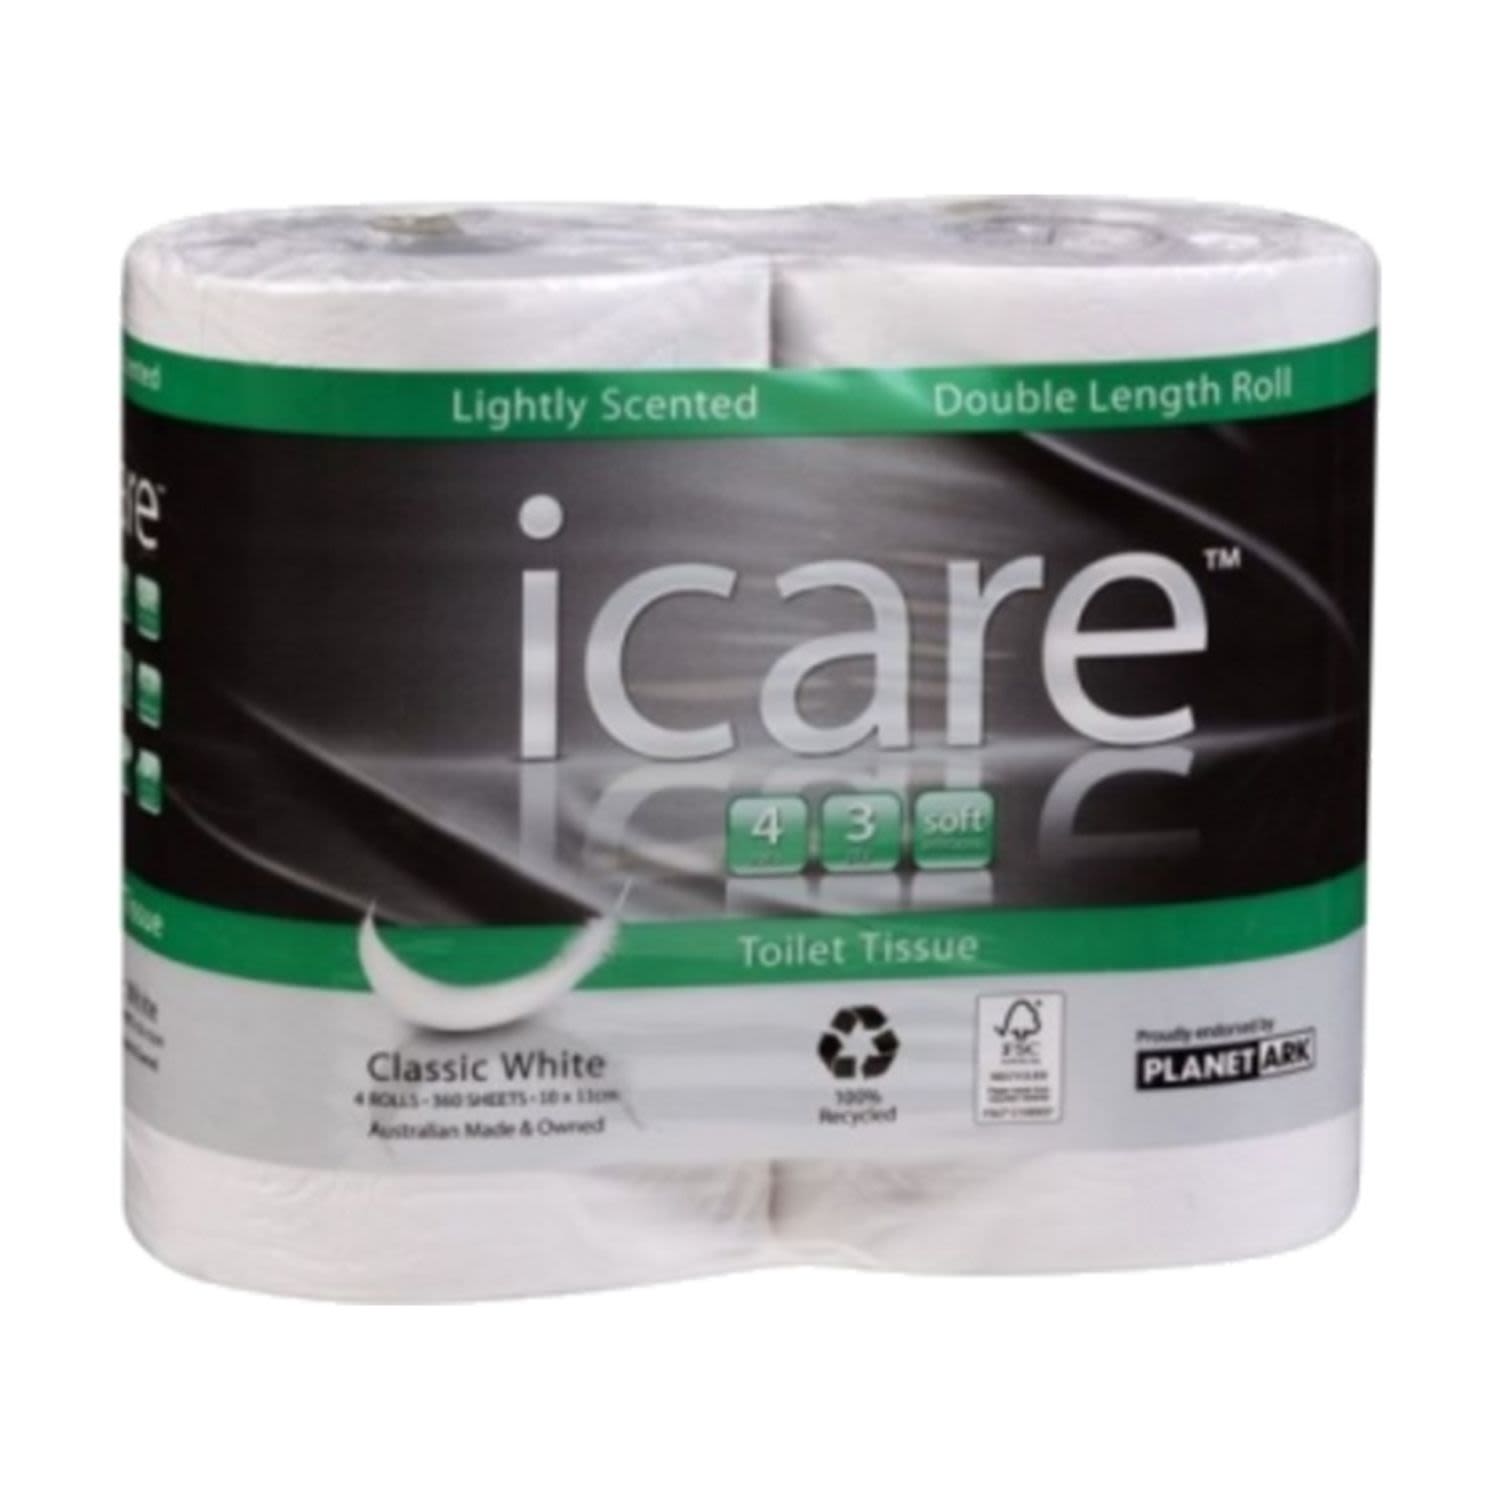 I-Care Double Length 3 Ply Toilet Roll, 4 Each